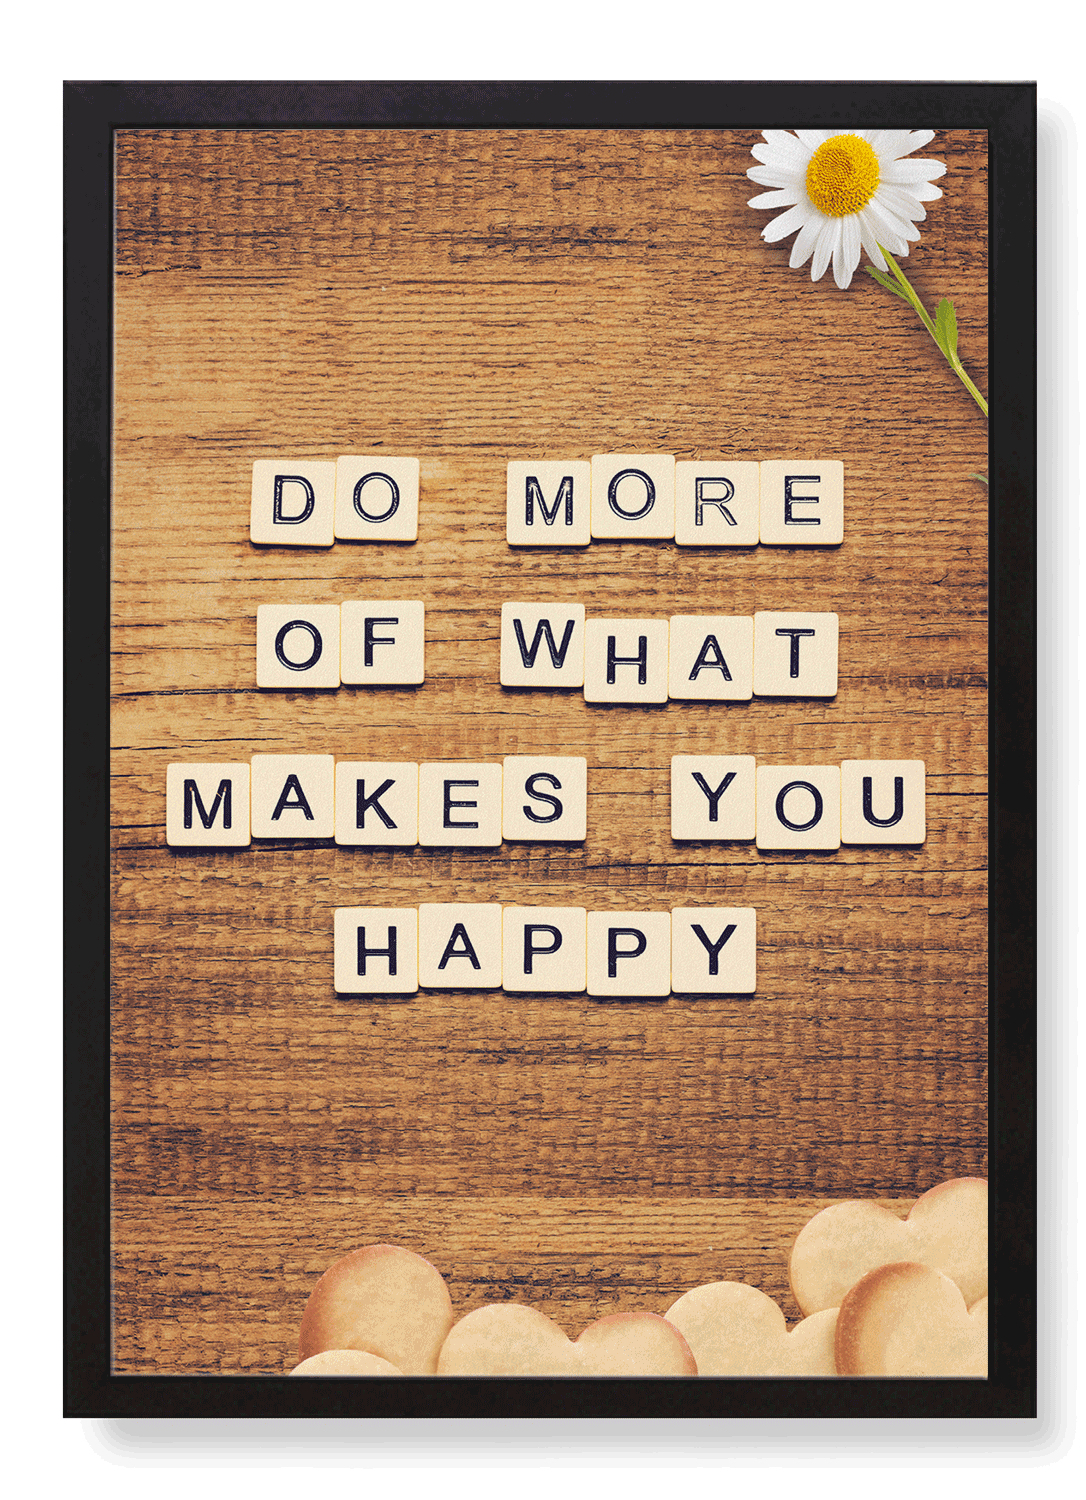 DO WHAT MAKES YOU HAPPY